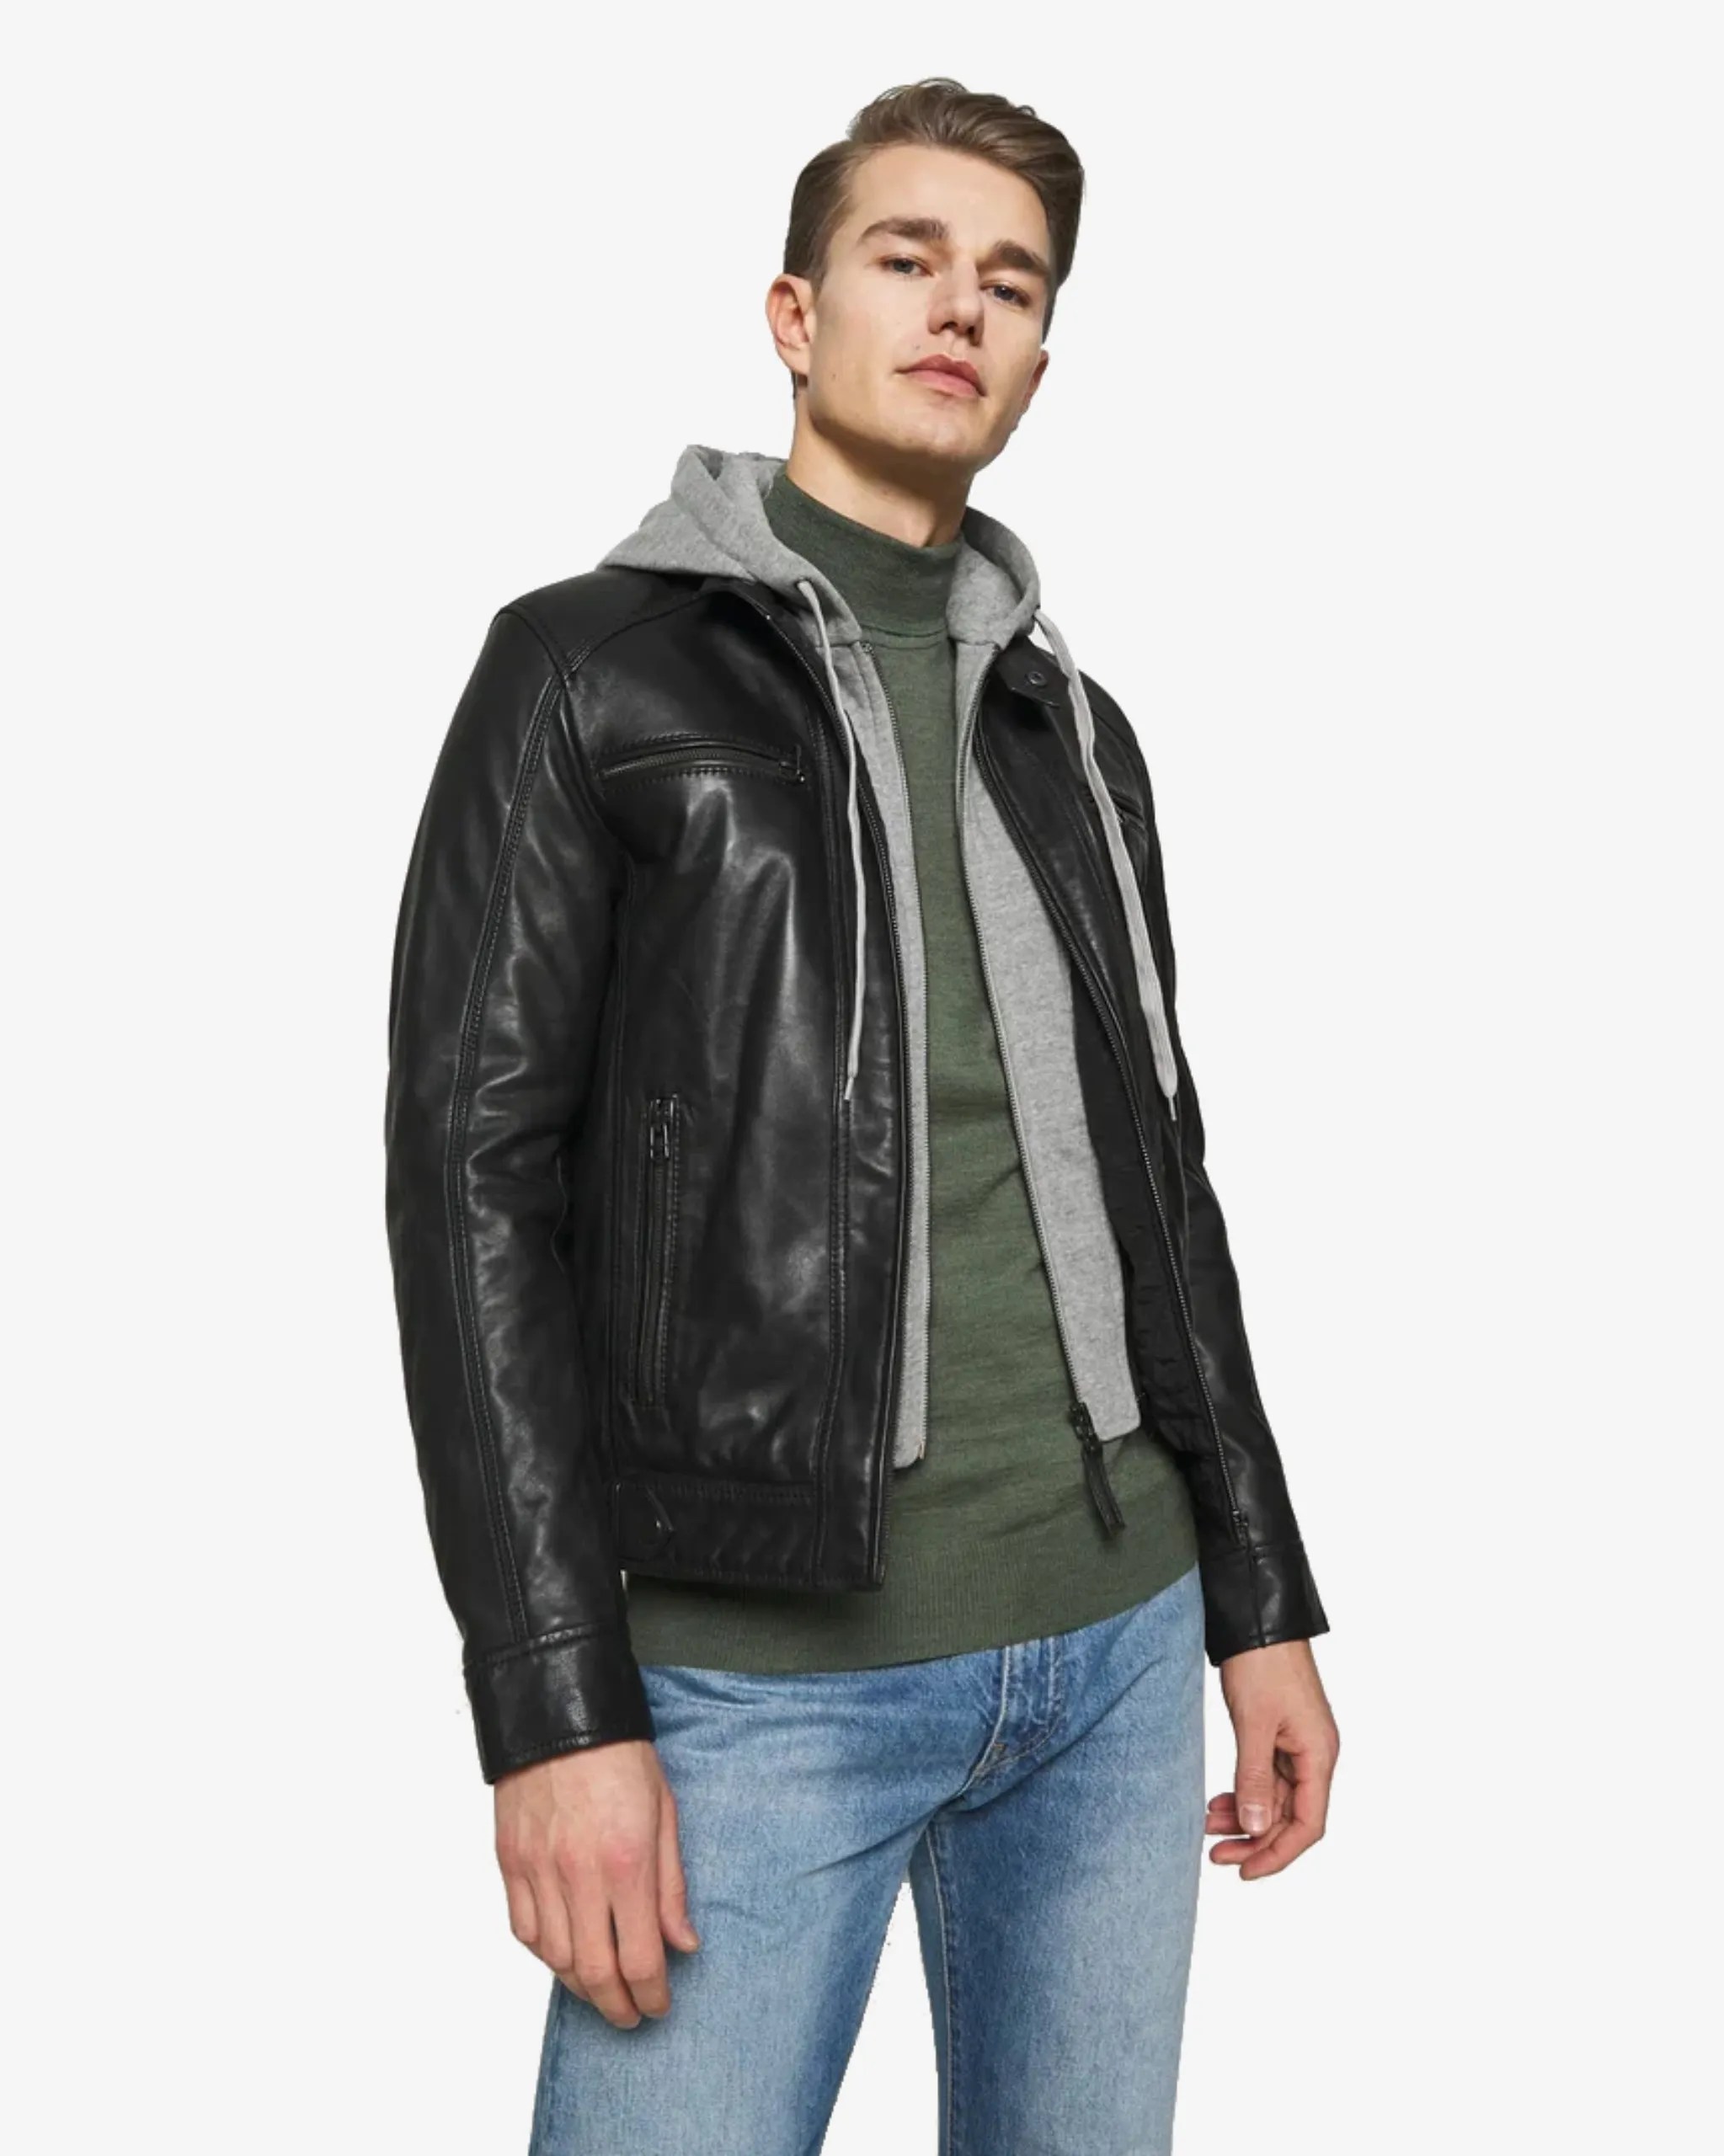 black-hooded-leather-jacket-lambskin-polyester-lining (4)